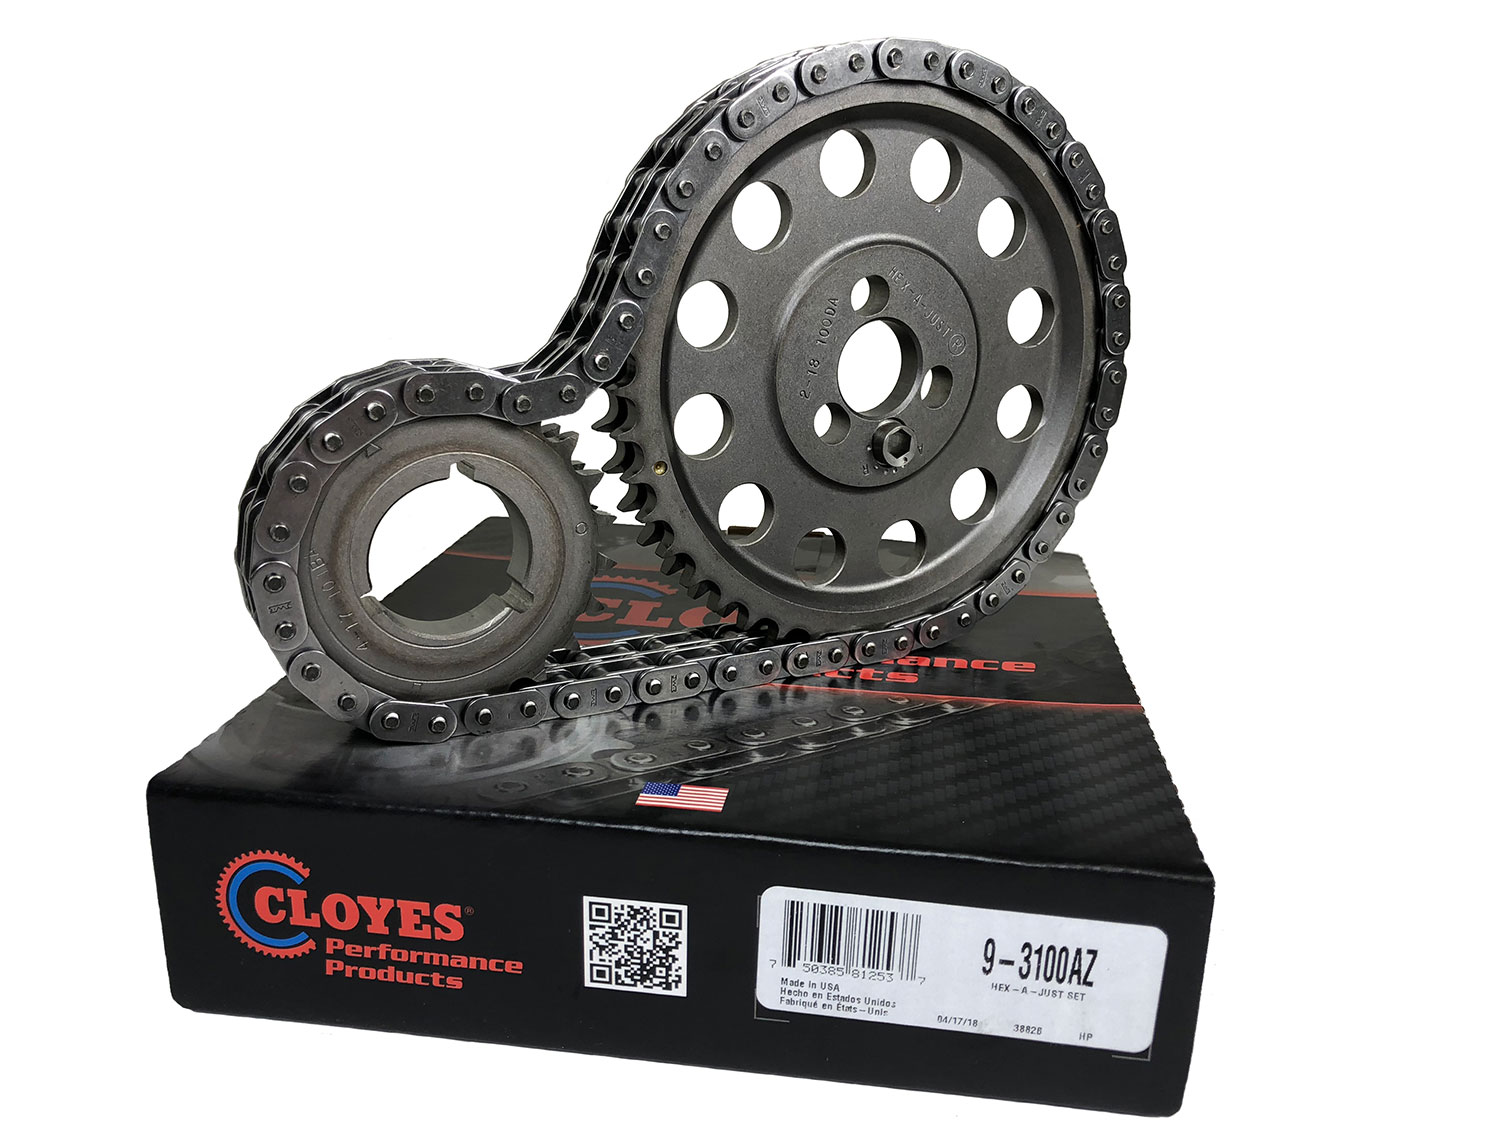 Cloyes to Showcase High-Performance Products